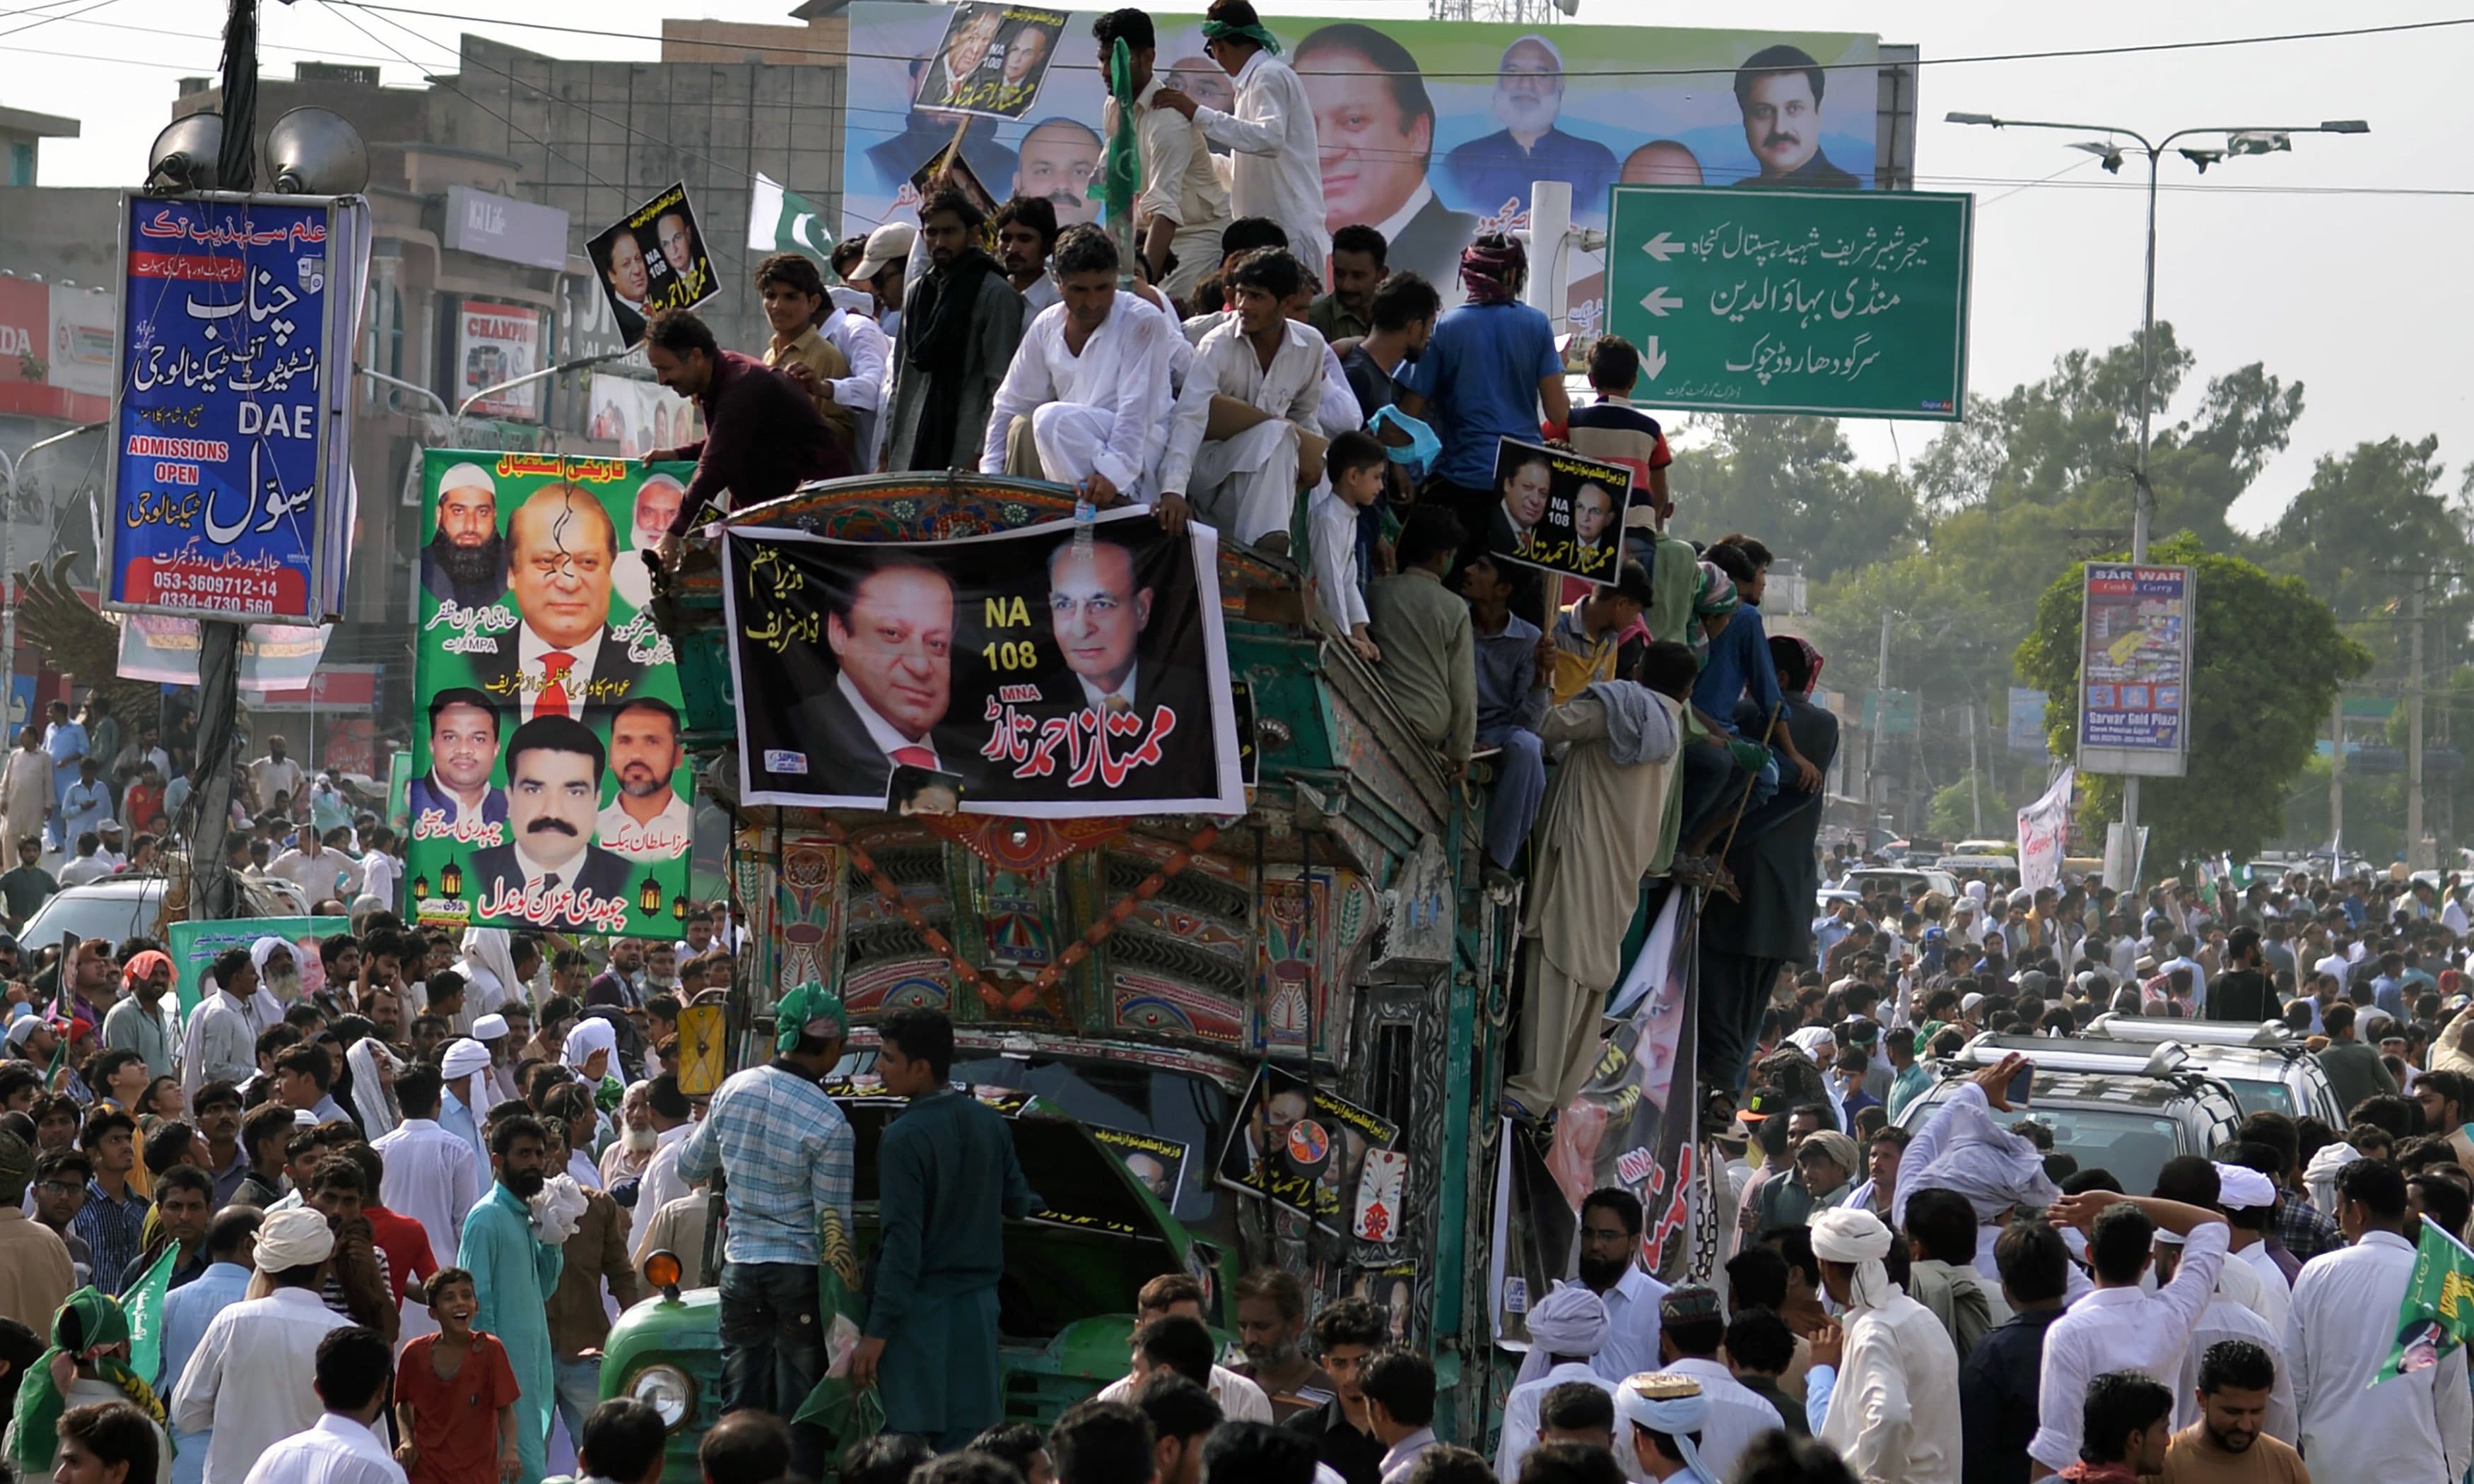 According to sources the rally will be taken in Lahore on arrival of Nawaz Sharif and Maryam Nawaz